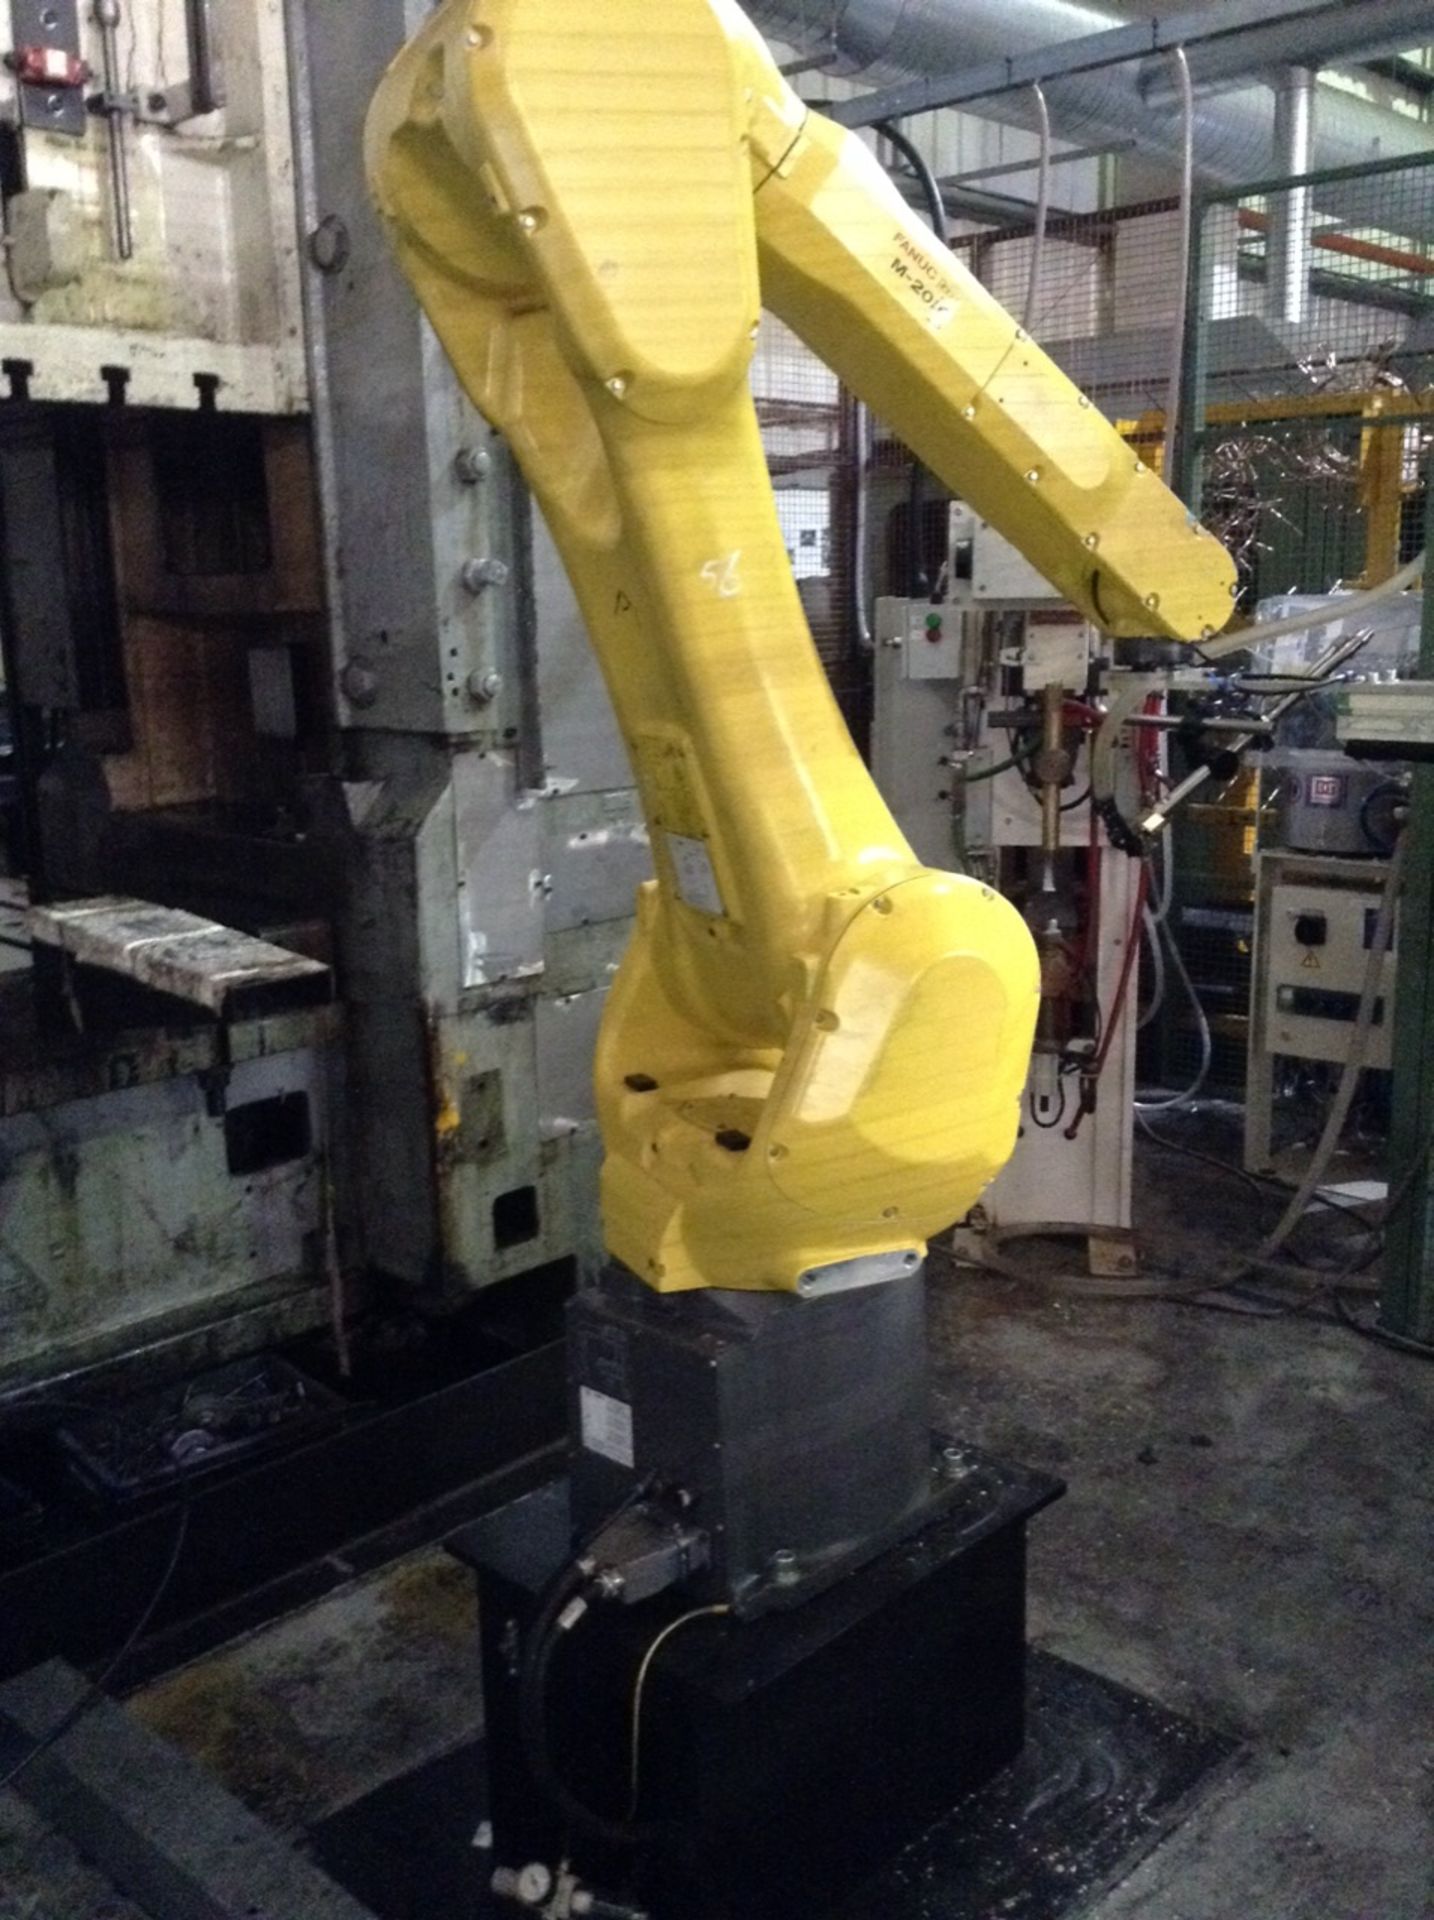 1 Fanuc , M-20iB25 , 6-axes 25kg payload Robot, Floor Mounted, with controller model R-30iR Plus, An